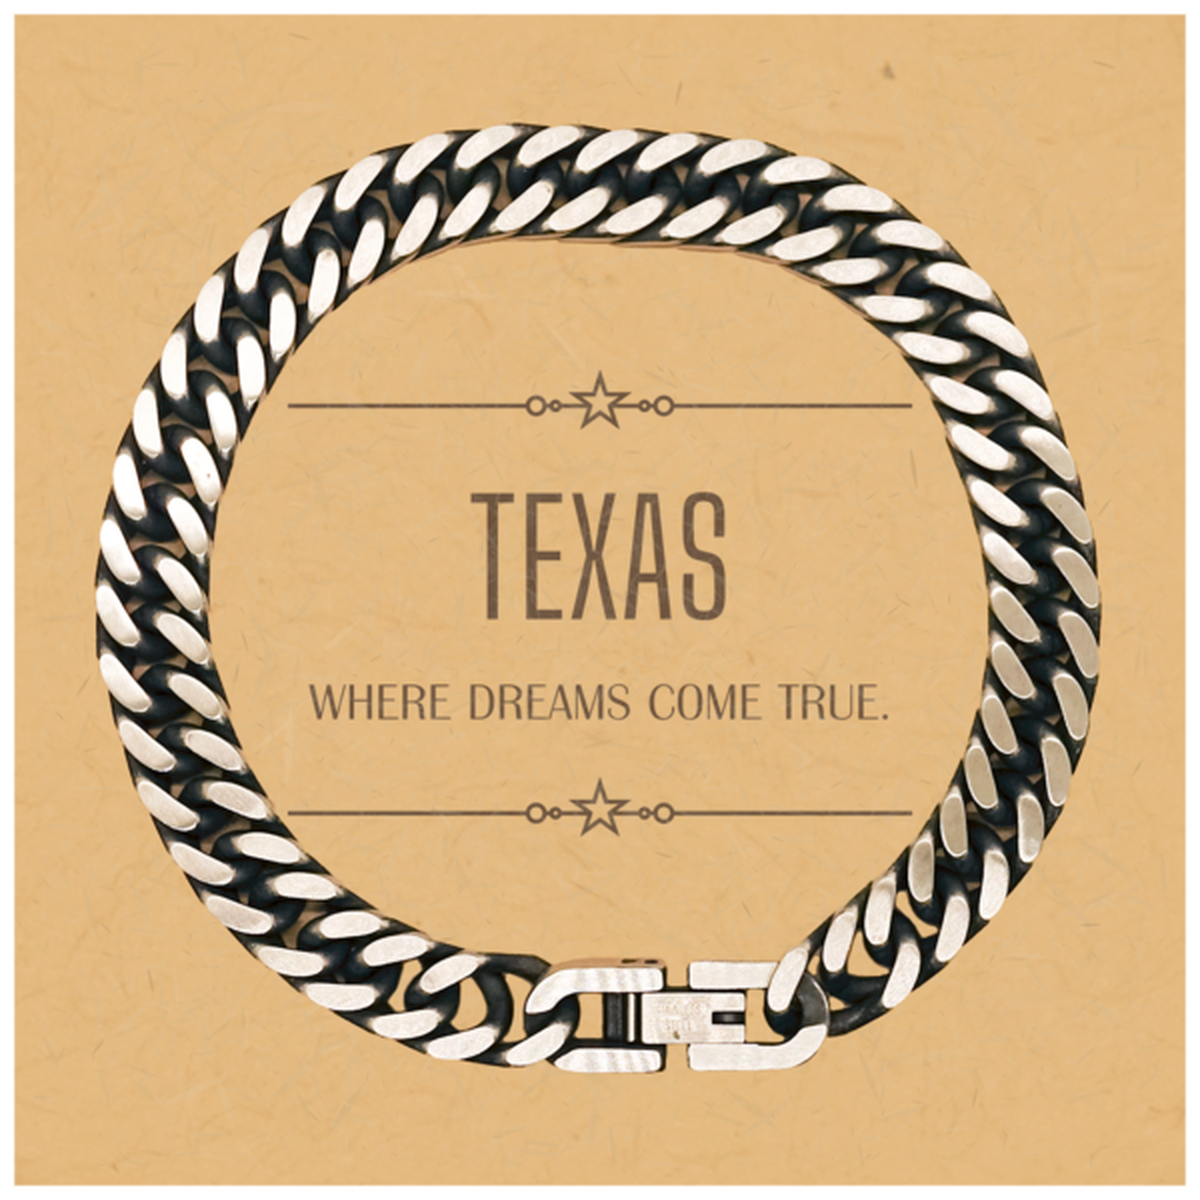 Love Texas State Cuban Link Chain Bracelet, Texas Where dreams come true, Birthday Christmas Inspirational Gifts For Texas Men, Women, Friends